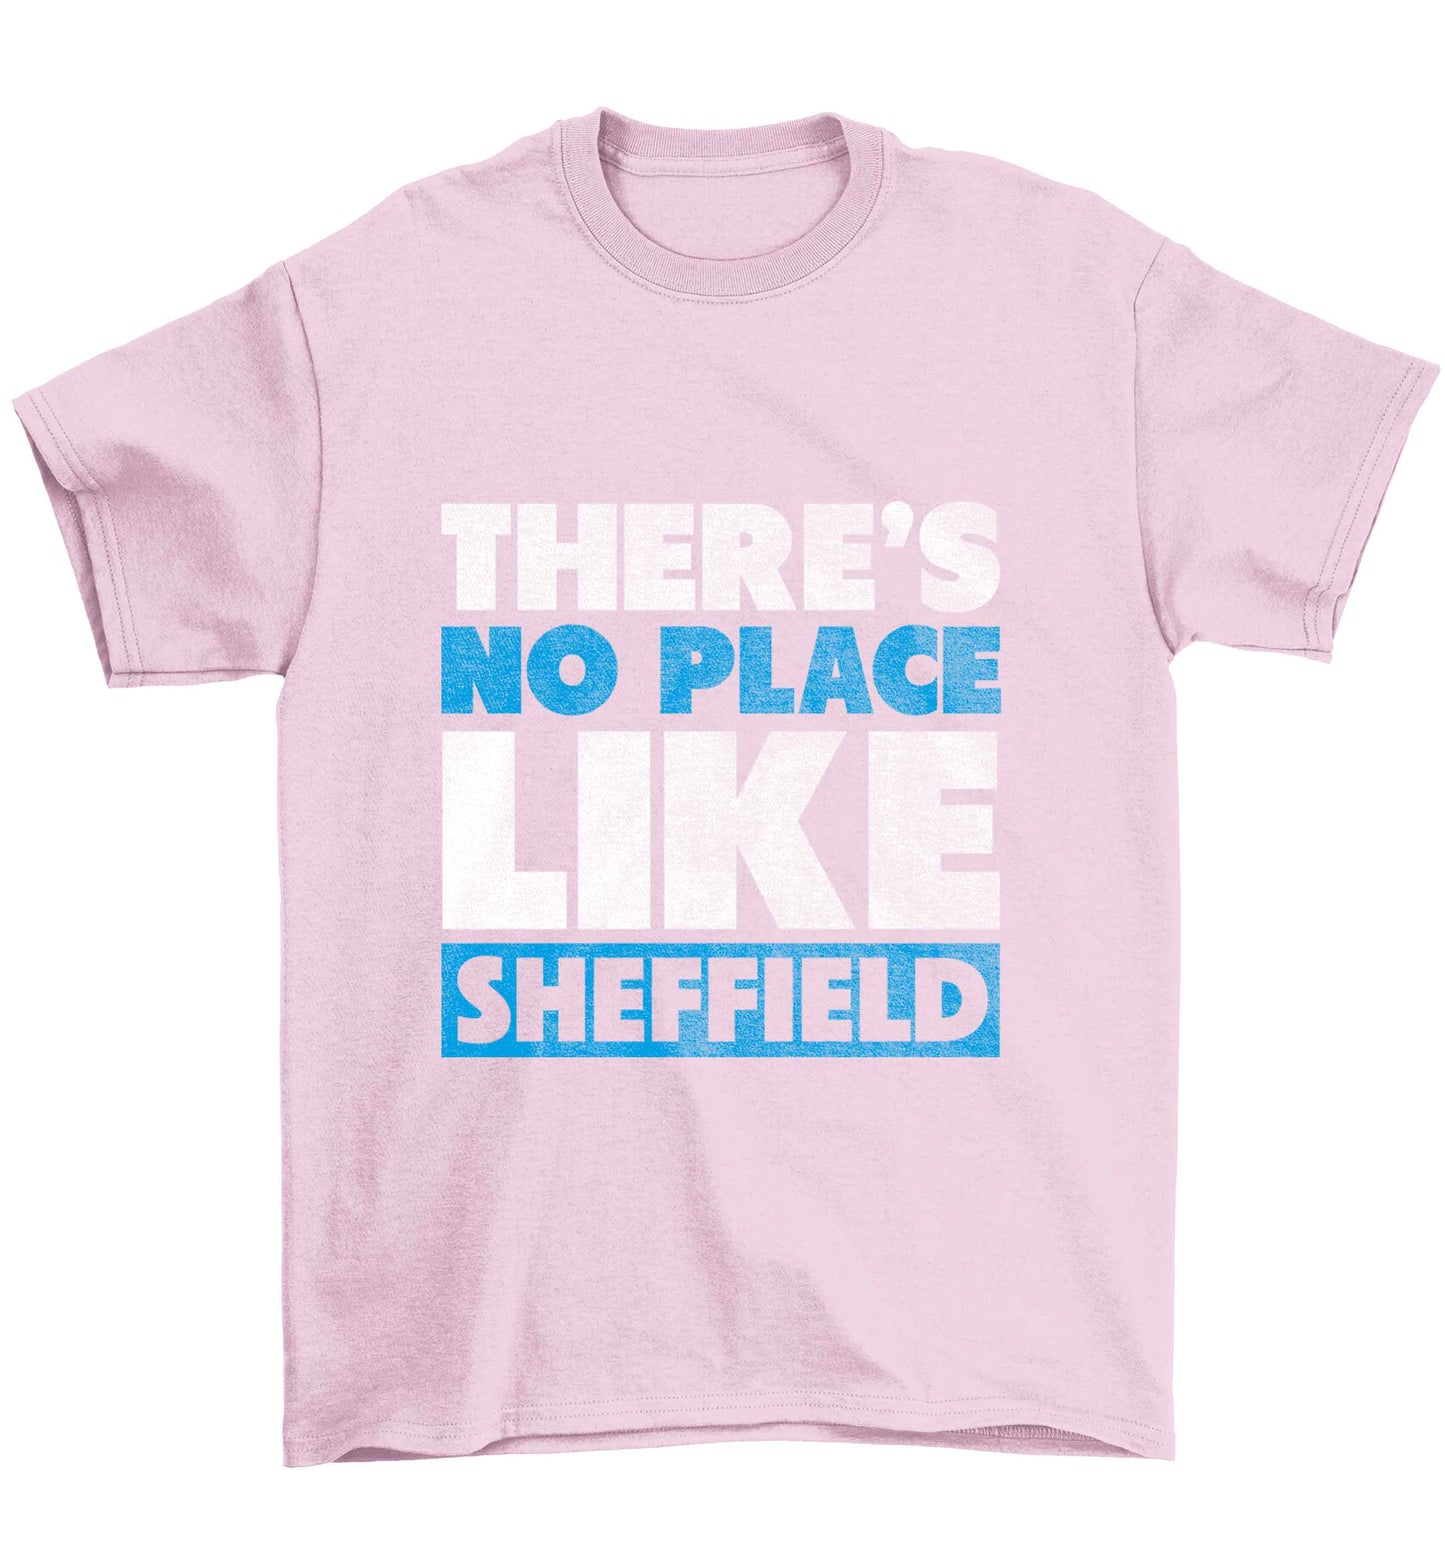 There's no place like Sheffield Children's light pink Tshirt 12-13 Years